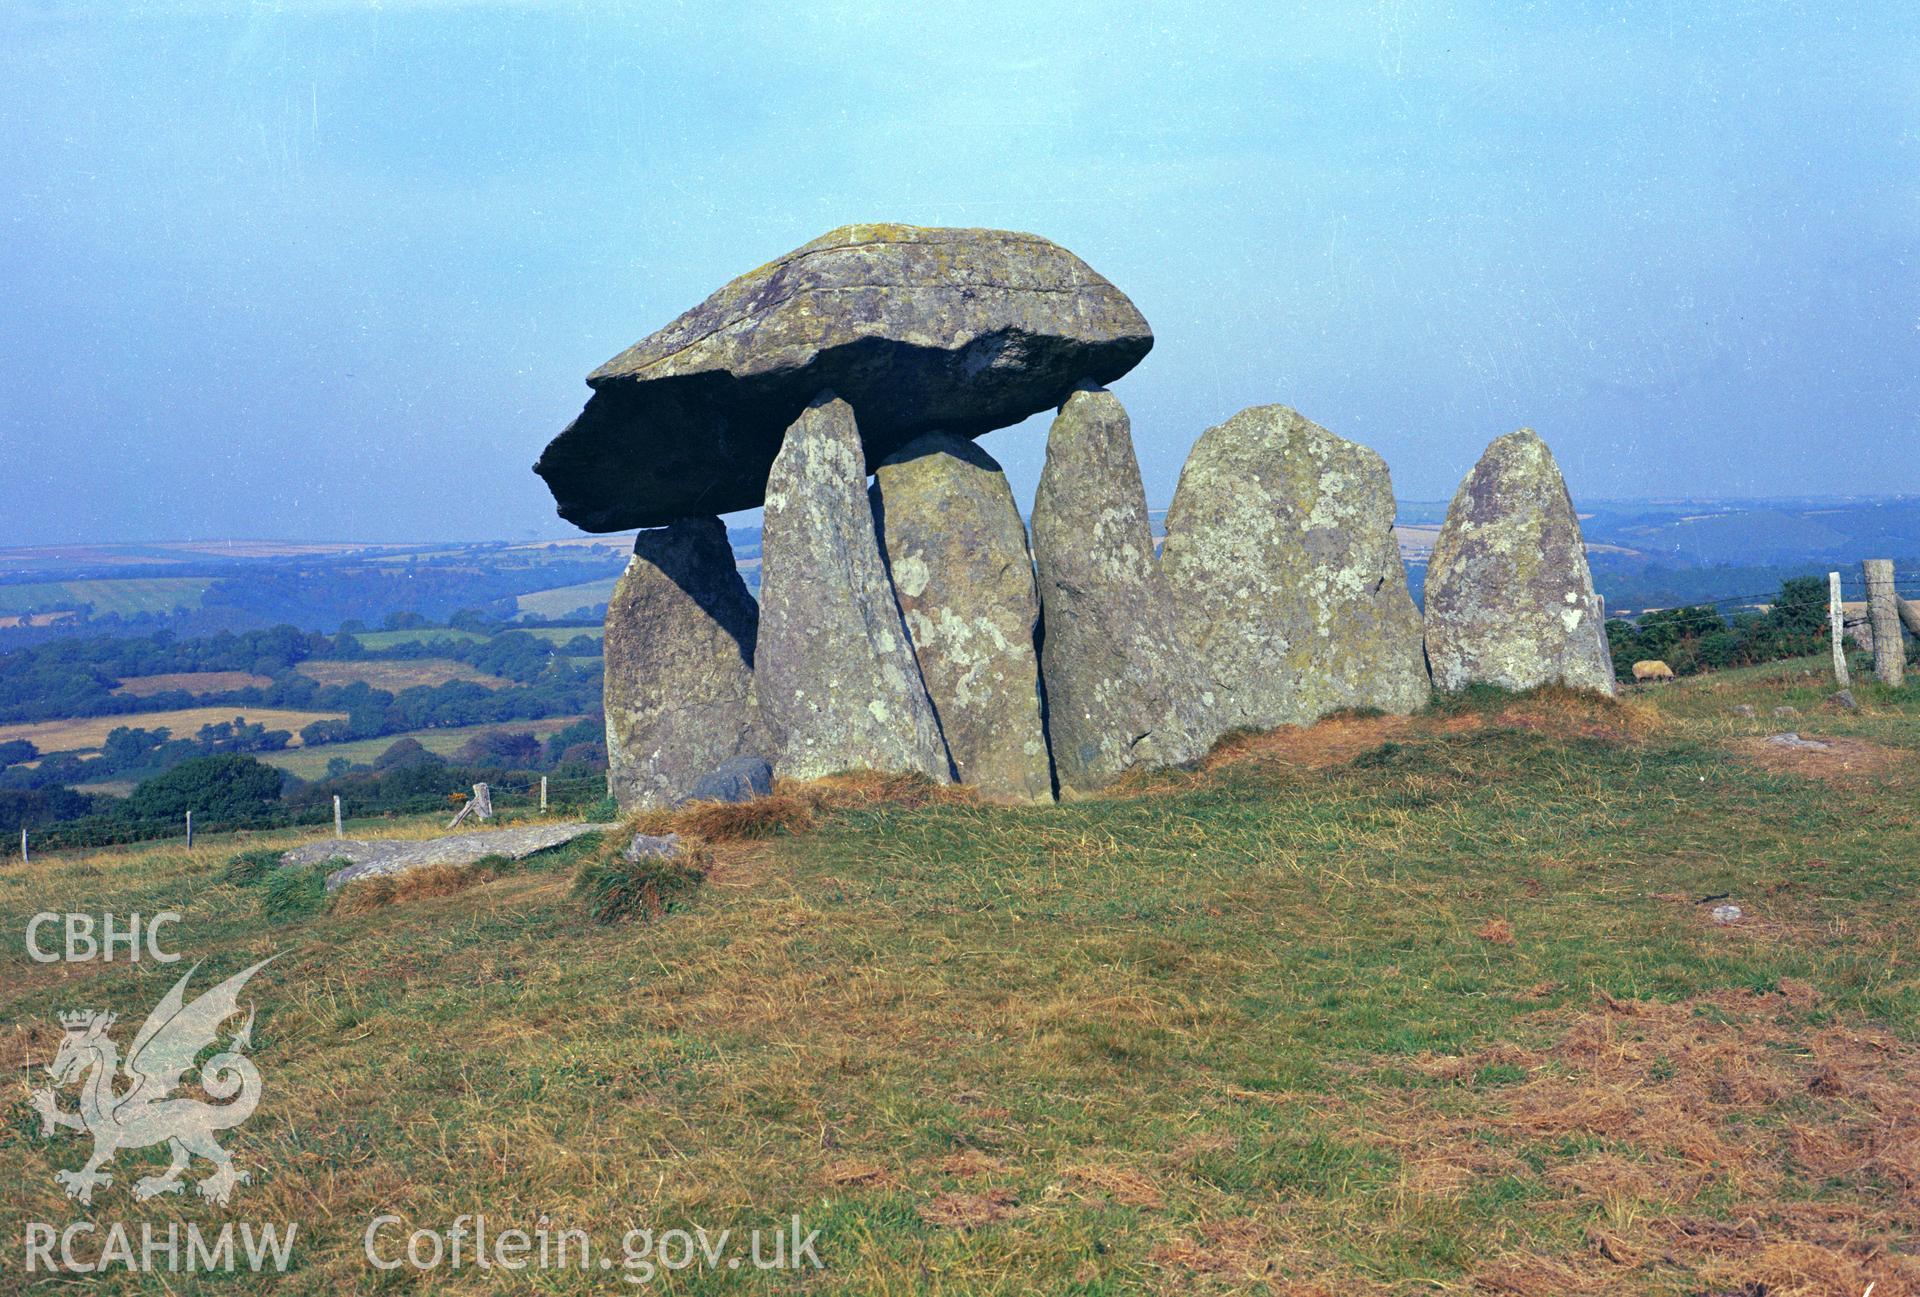 Digital copy of a colour negative showing view of Pentre Ifan Cromlech, taken by RCAHMW.